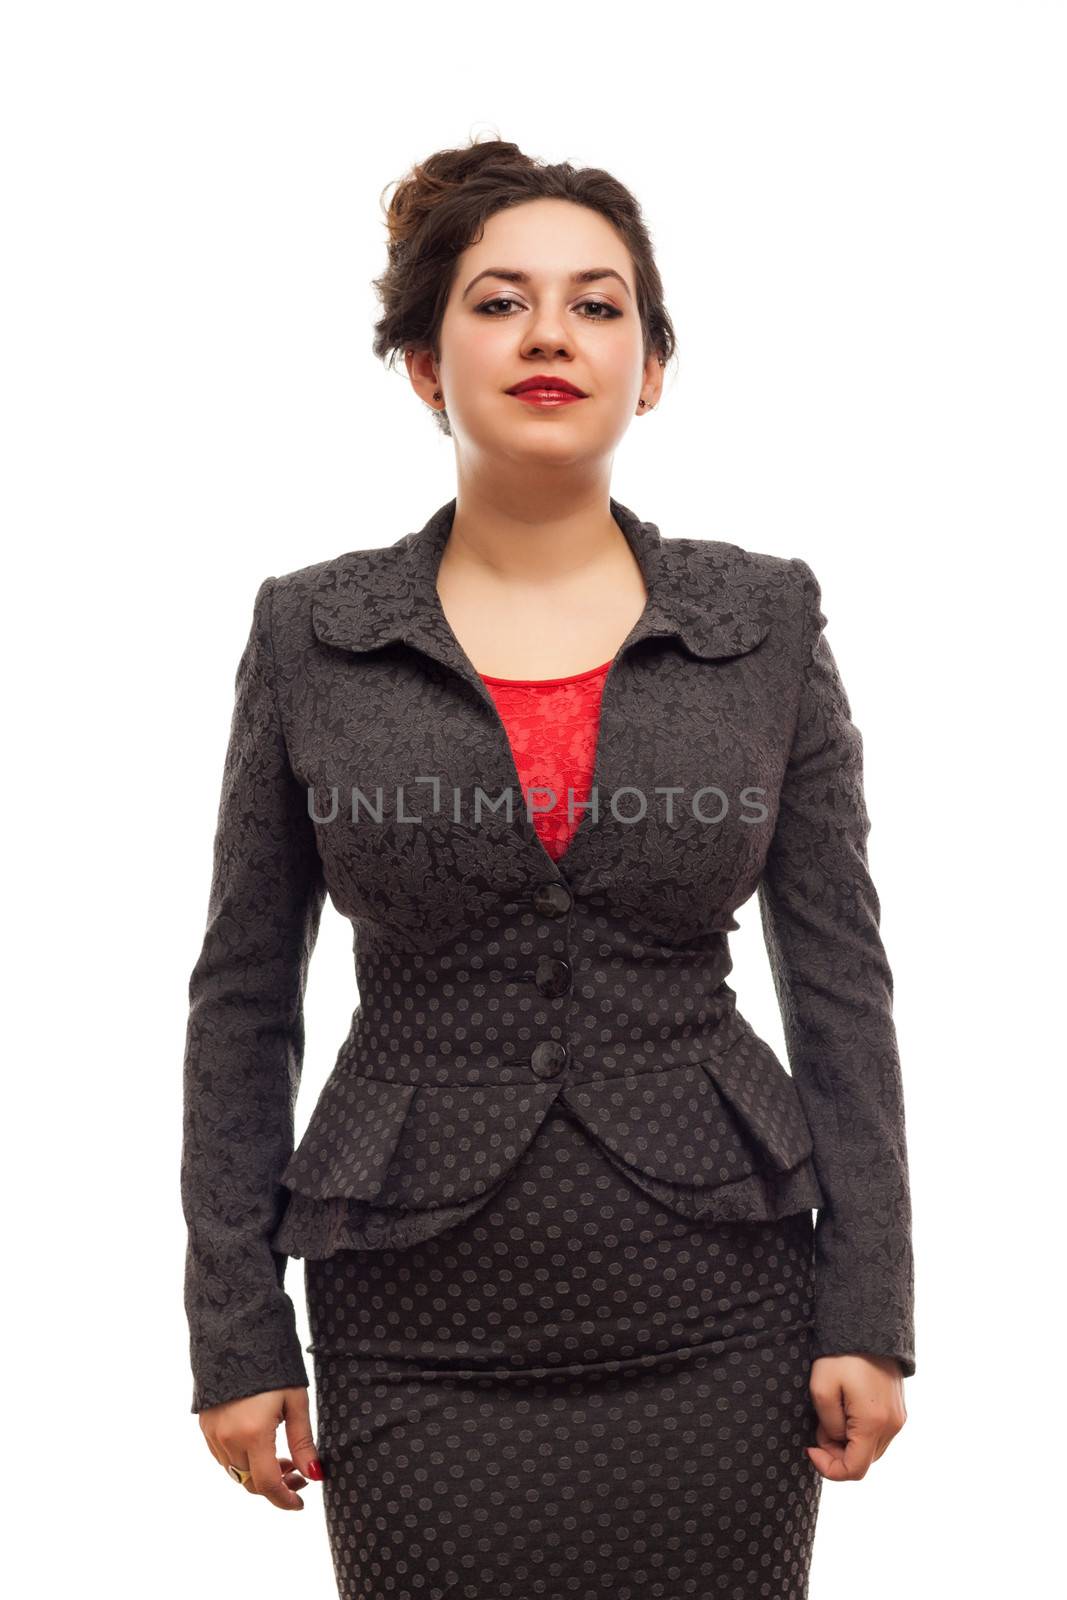 Confident business woman portrait isolated over a white background